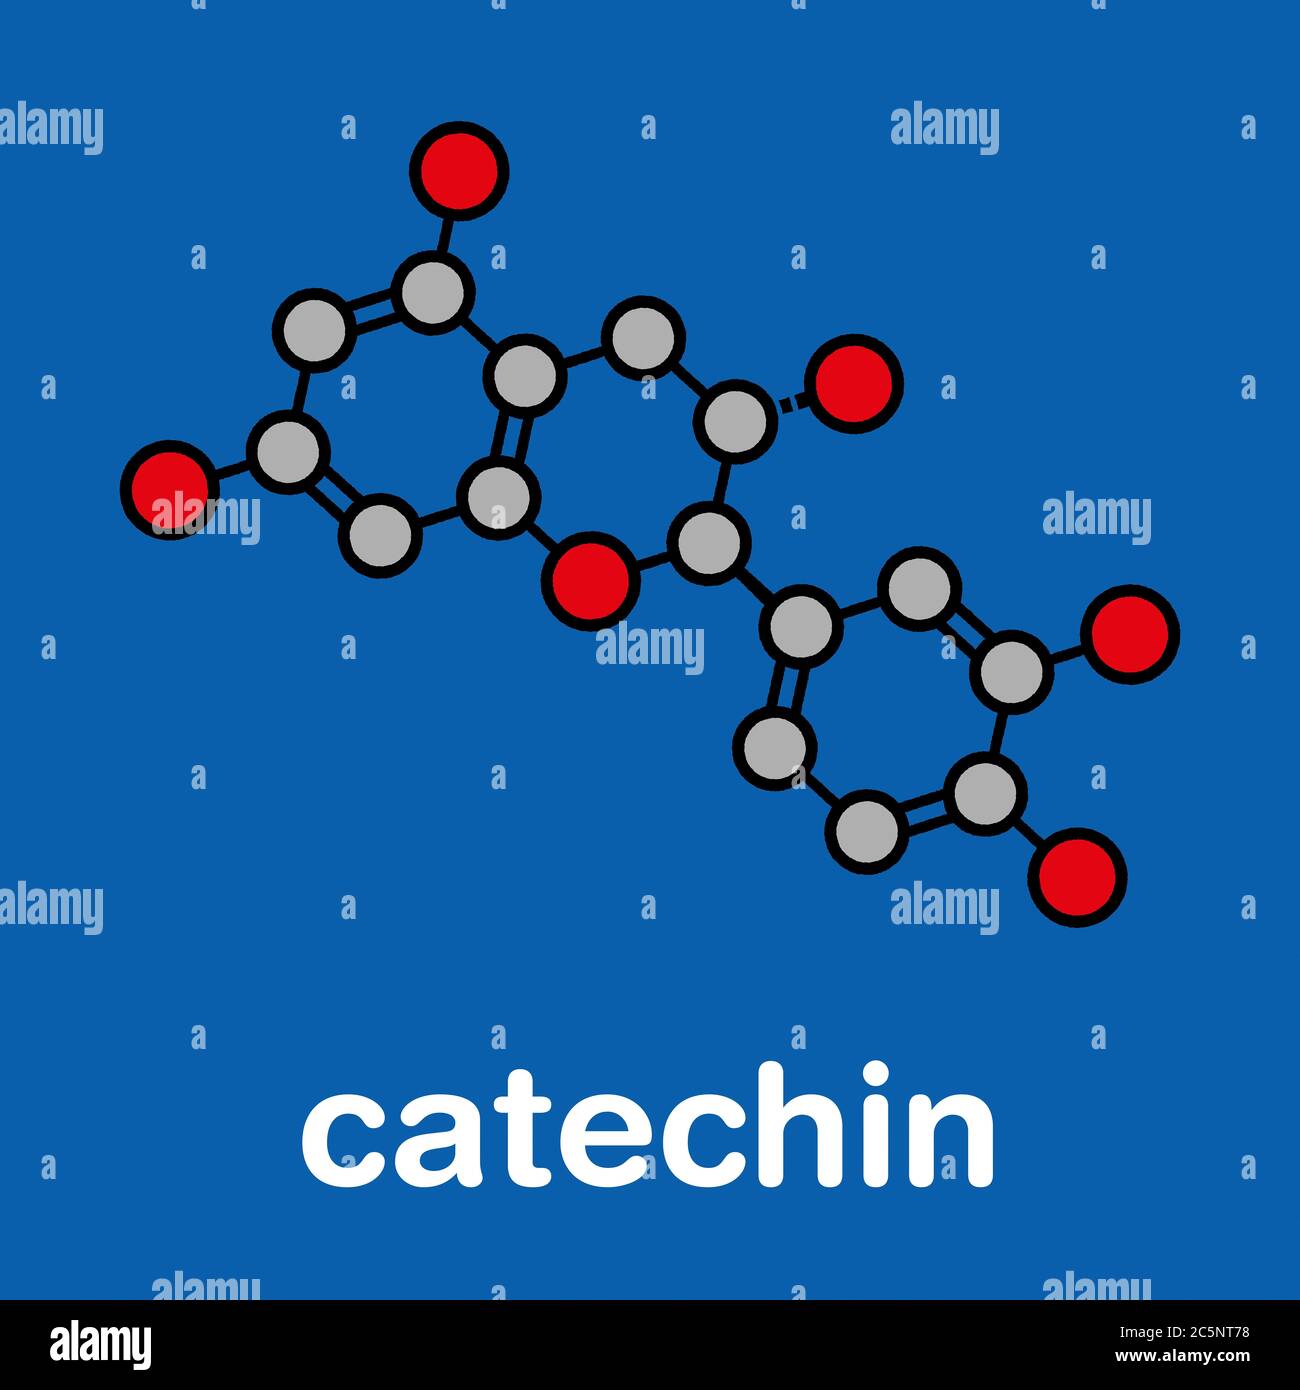 Catechin herbal antioxidant molecule. Stylized skeletal formula (chemical structure): Atoms are shown as color-coded circles: hydrogen (hidden), carbon (grey), oxygen (red). Stock Photo